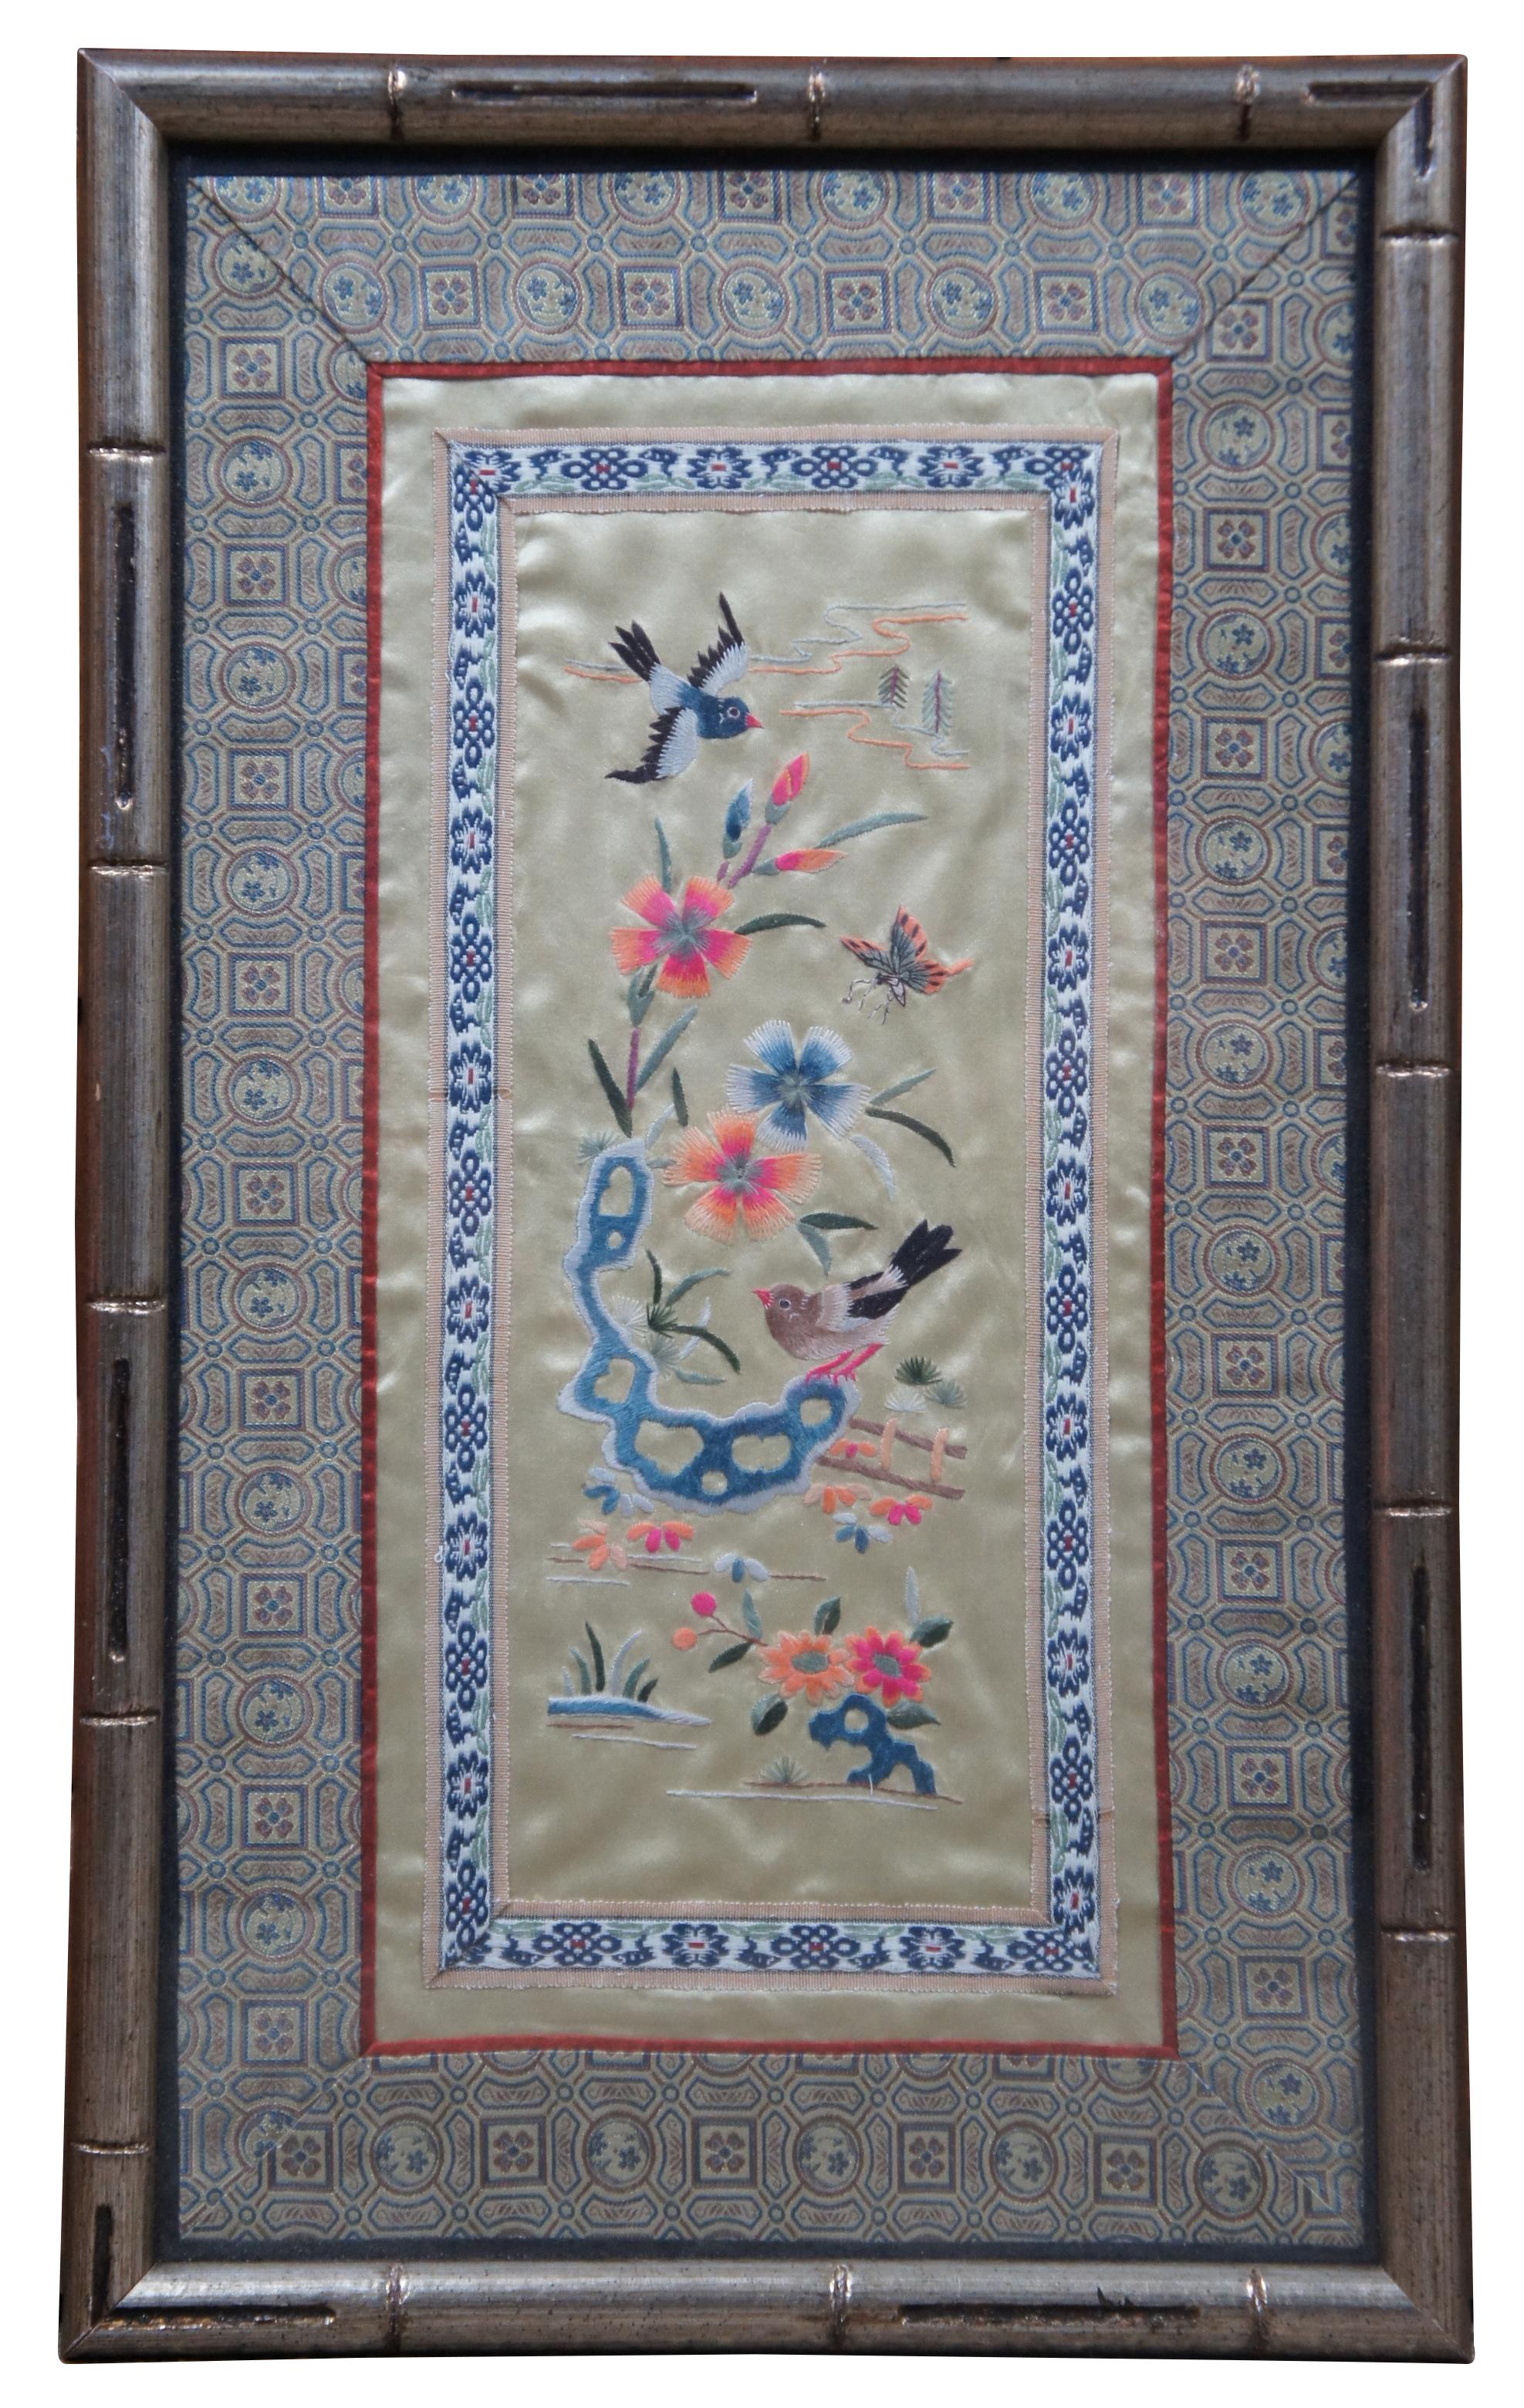 Pair of framed hand embroidered Chinese tapestries on gold silk, showing birds, flowers, nautical boats and pagoda / cottages.

Measures: 11.25” x 1” x 18.5” / Sans frame - 9.75” x 17” (Width x Depth x Height).